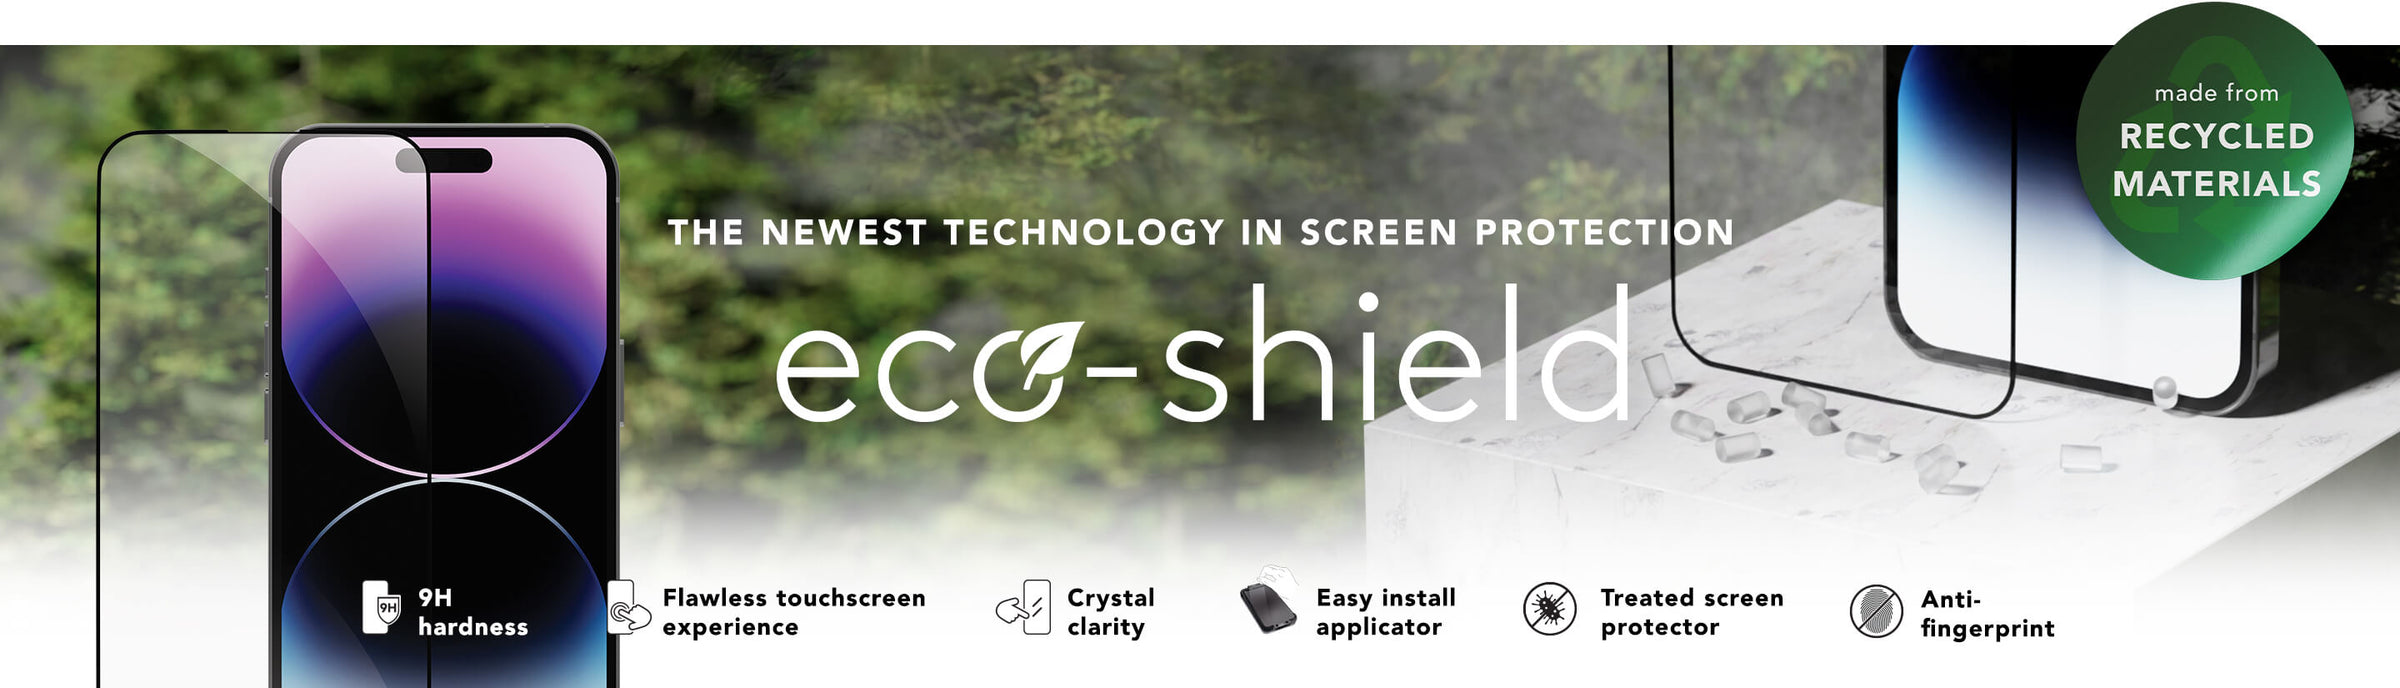 New dbramante1928 eco-shield recycled screenprotection